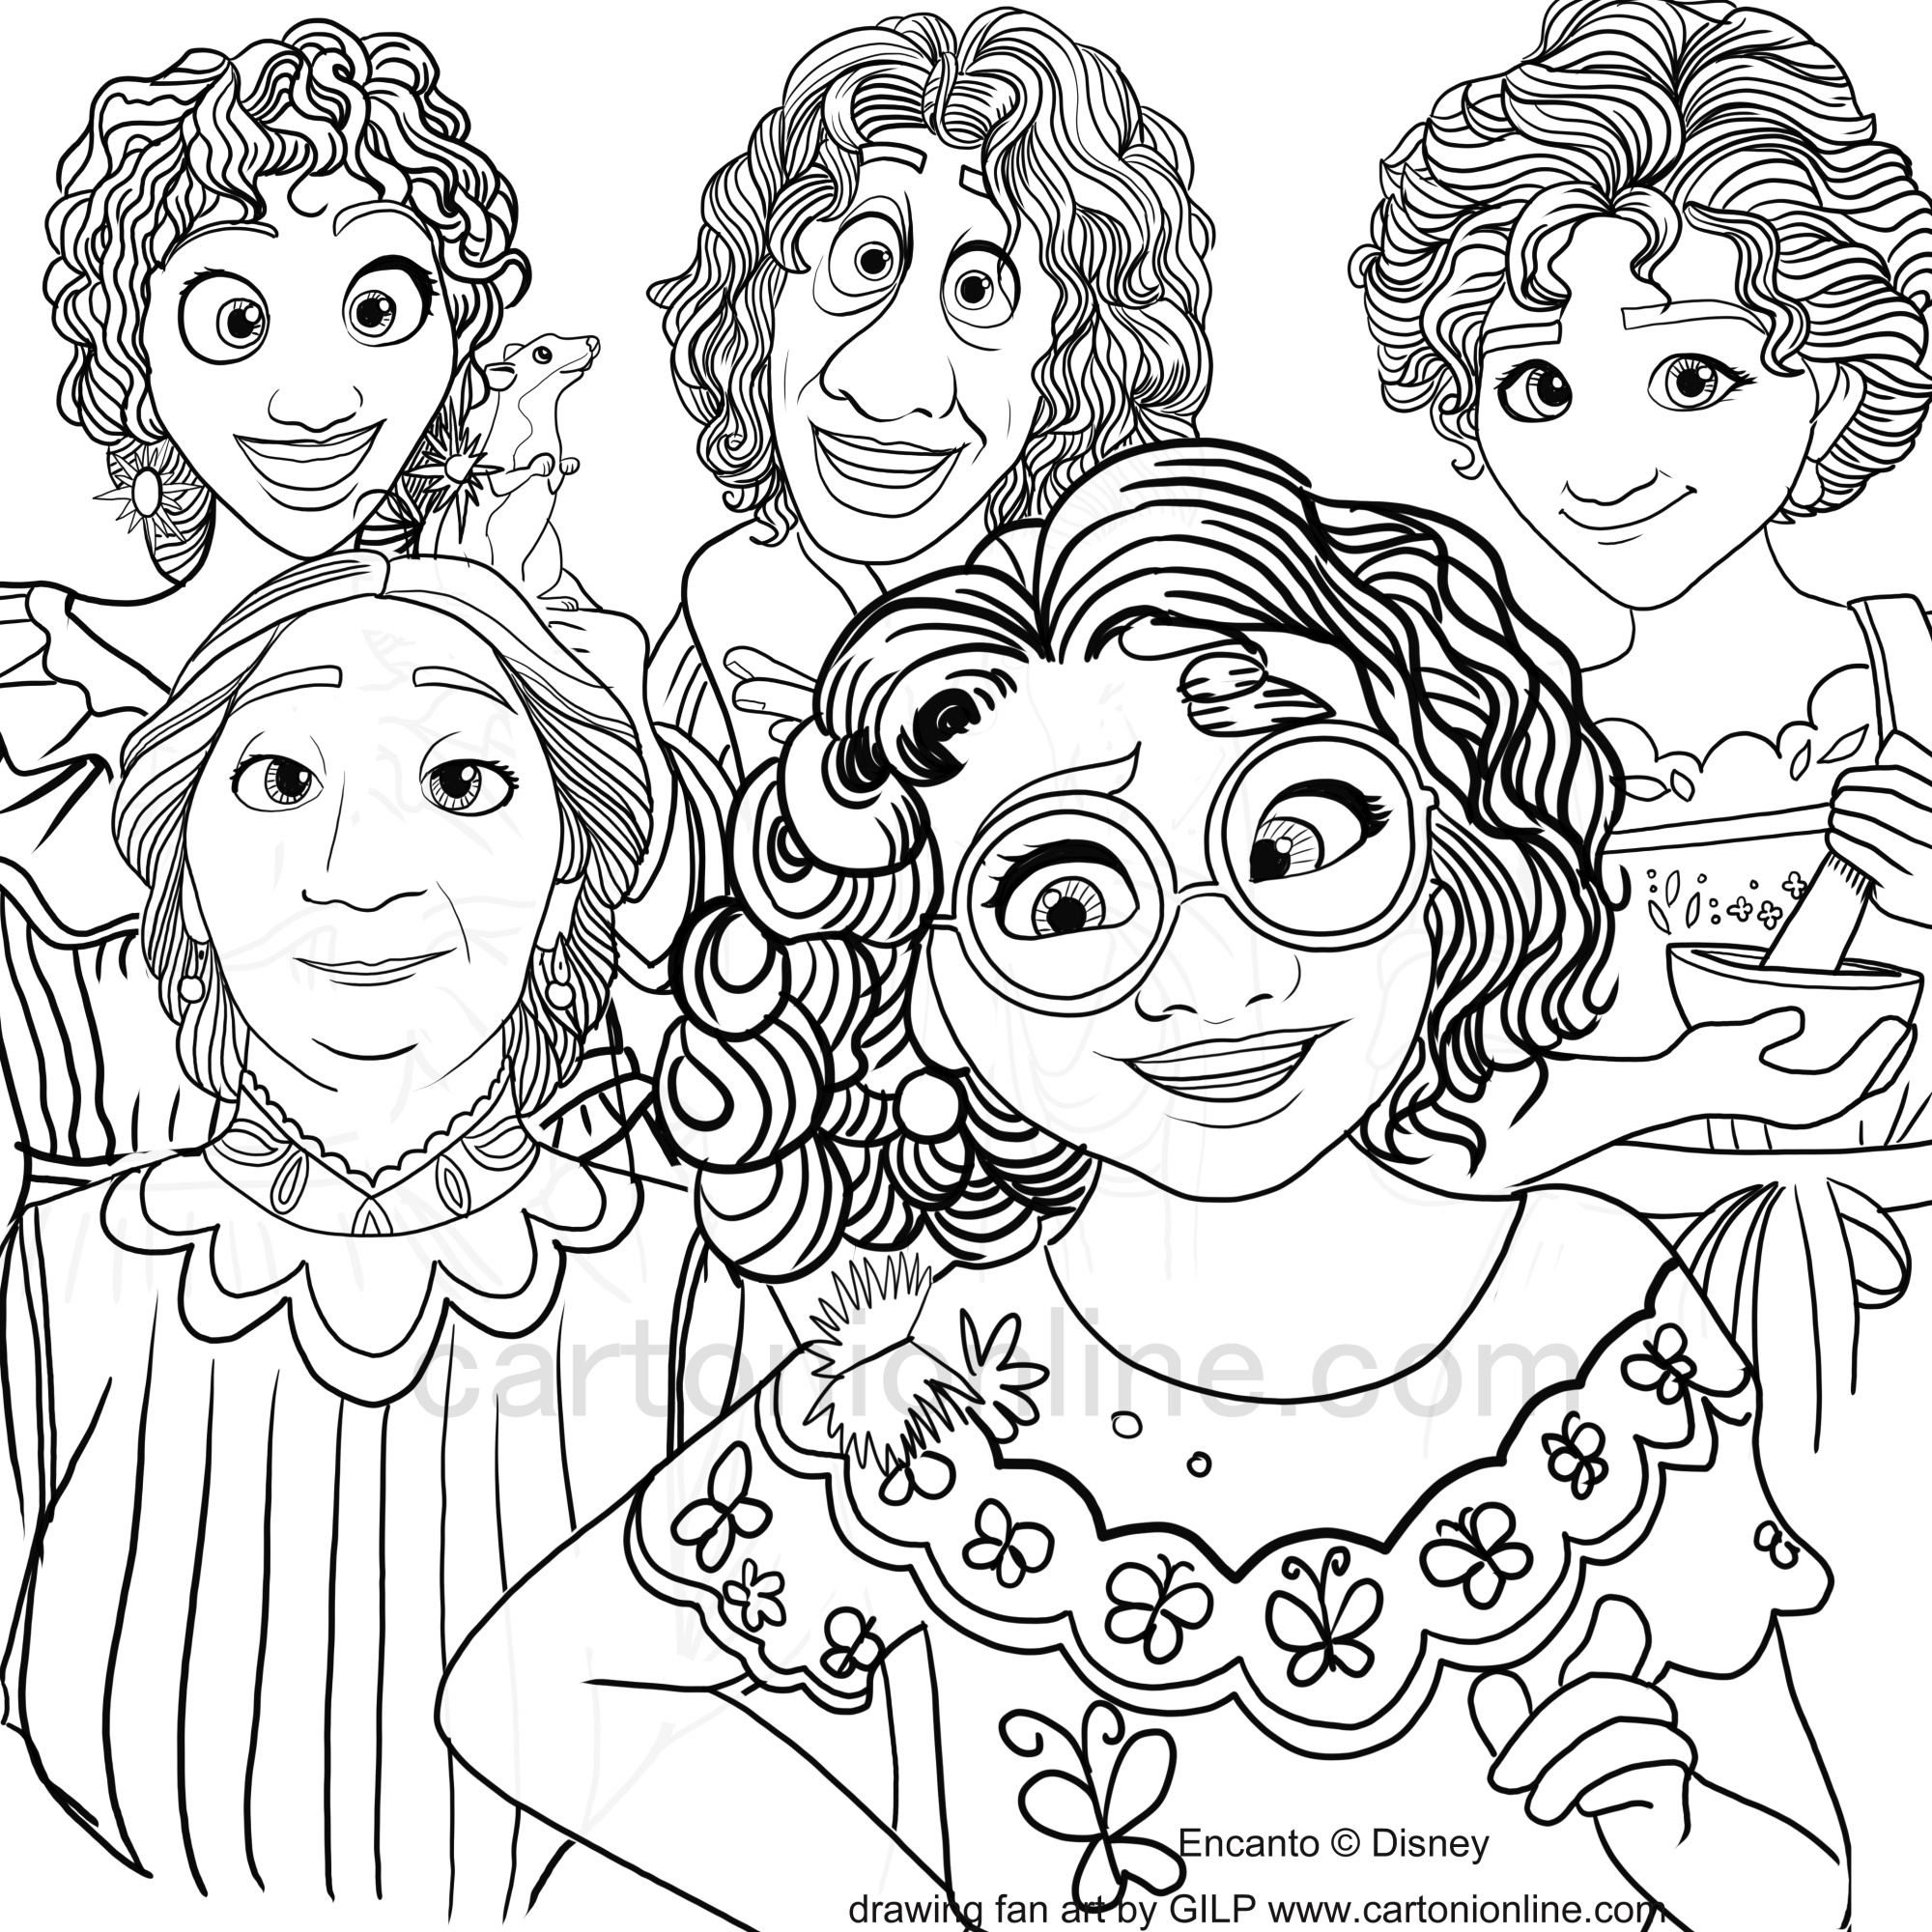 Encanto from Encanto coloring page to print and coloring